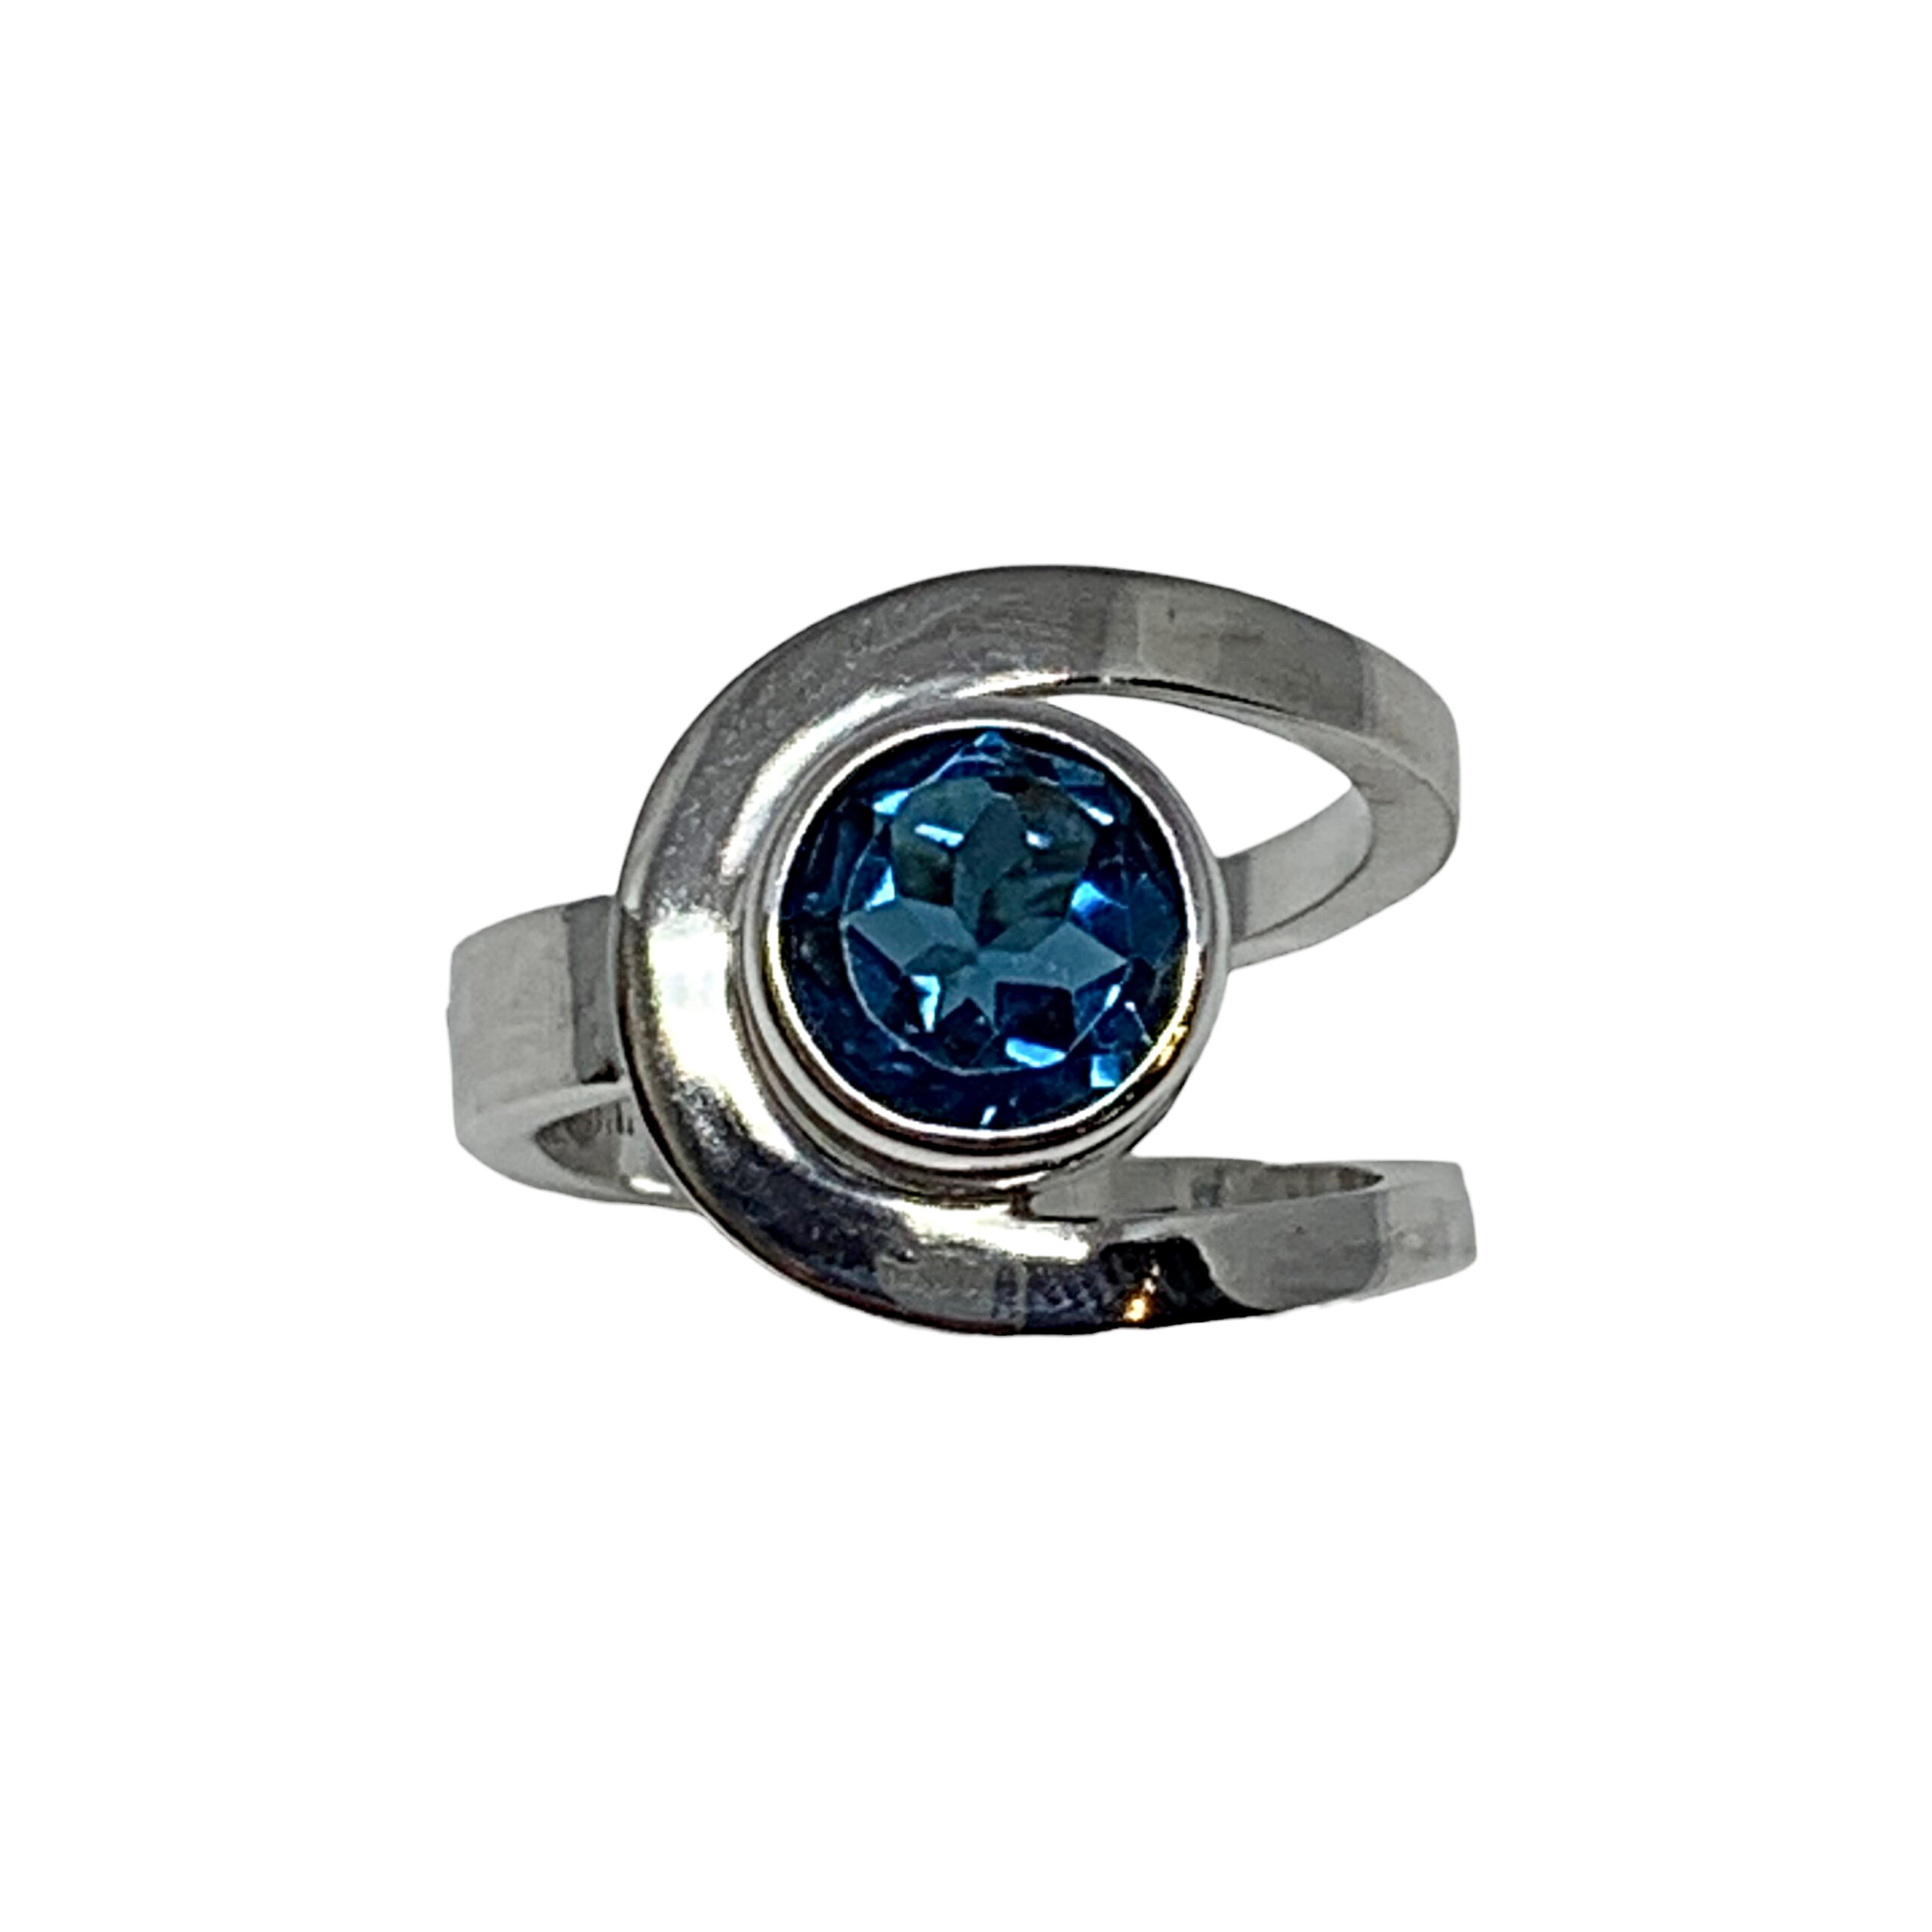 Handmade silver + 2.5 ct London blue topaz ring by A&R Jewellery | Effusion Art Gallery, Invermere BC